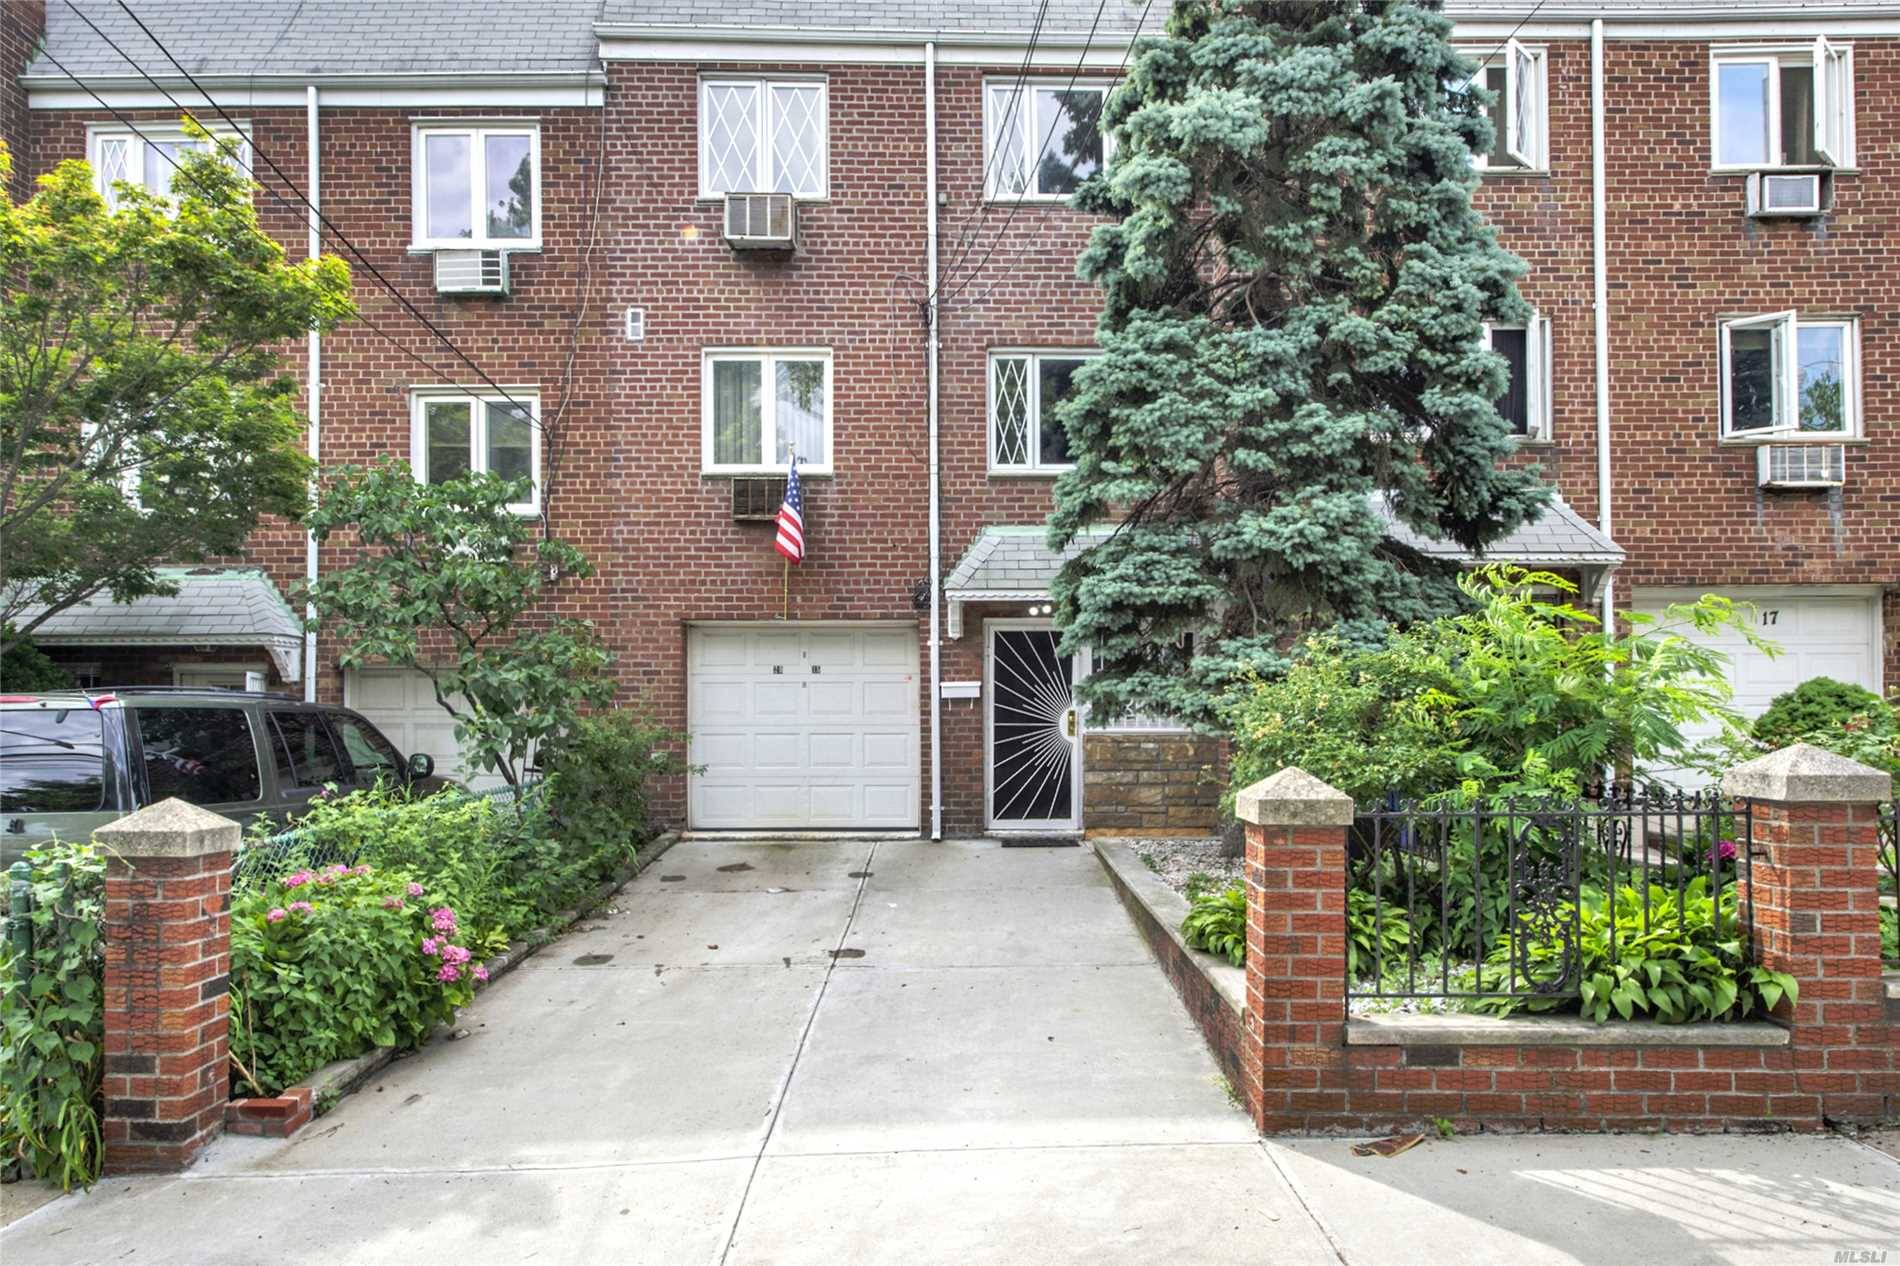 Well Maintained Spacious, Brick 3 Family Colonial.